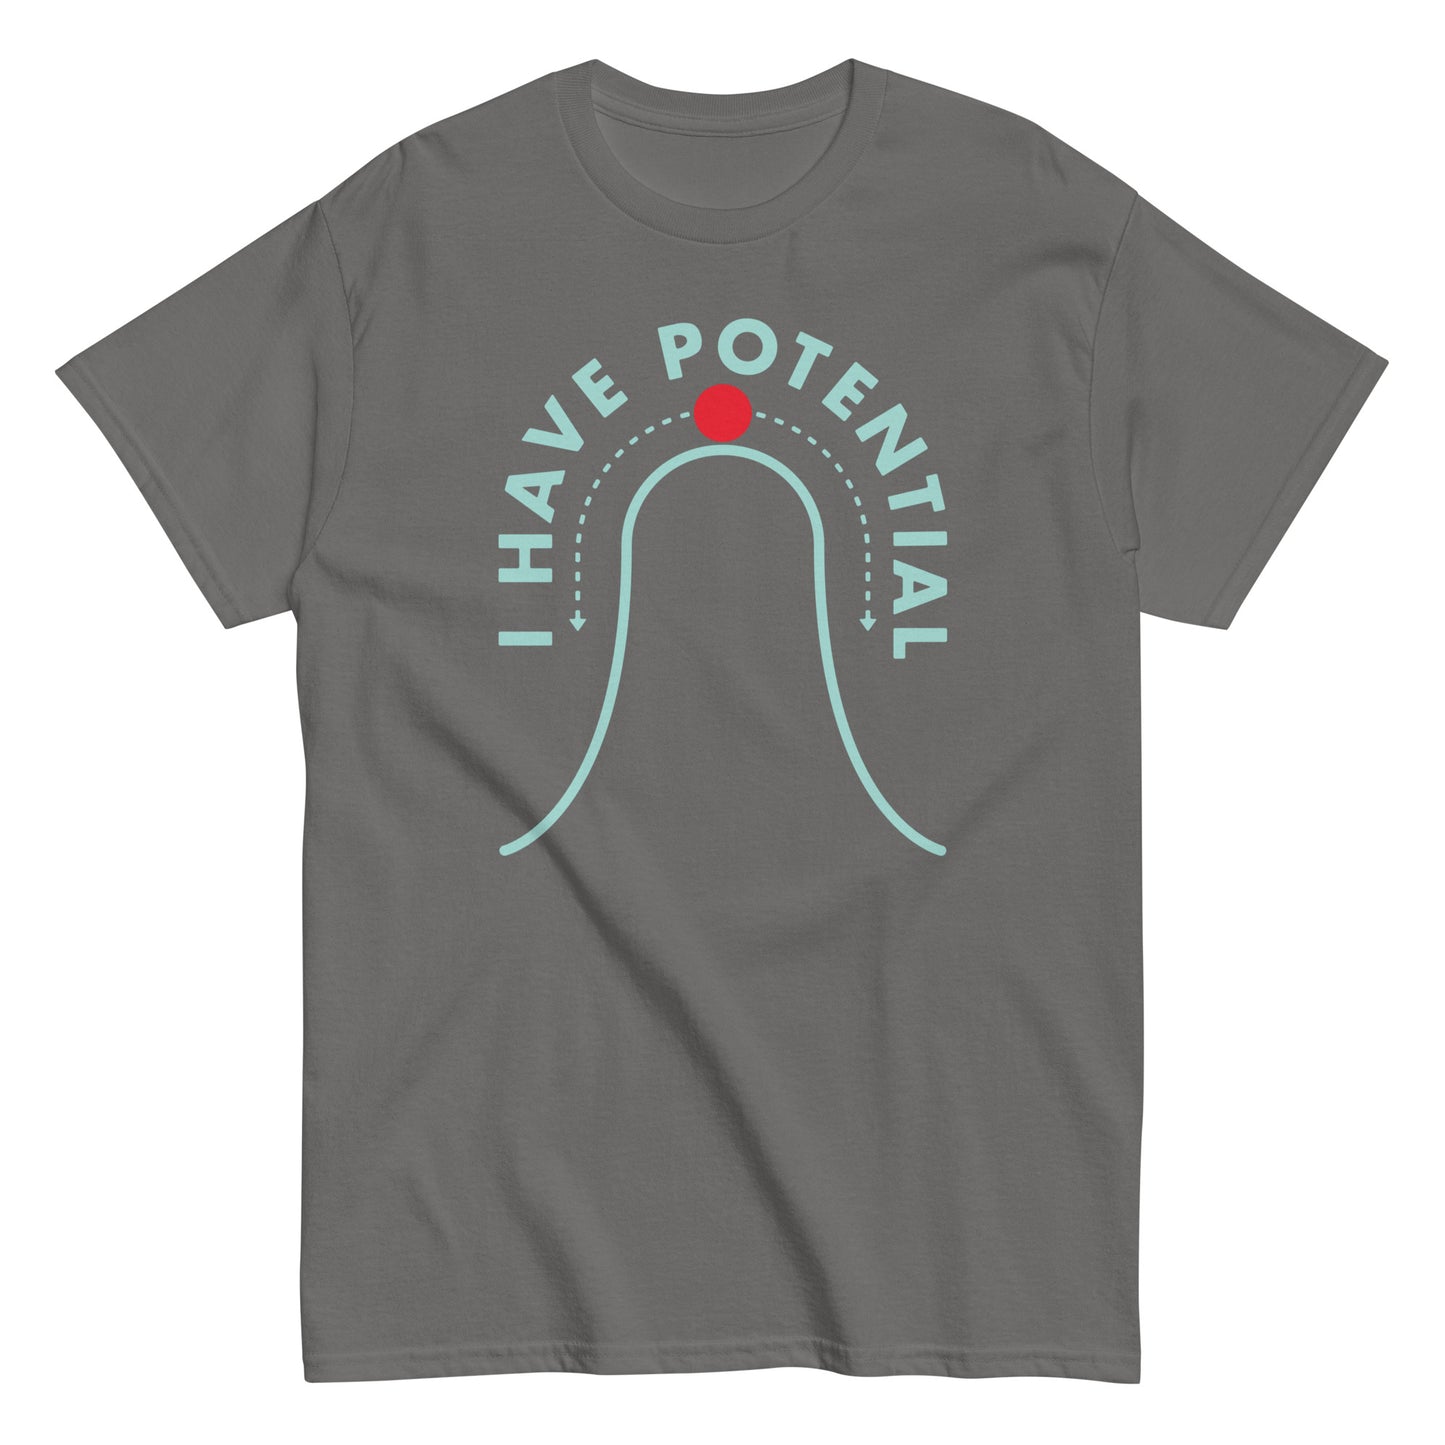 I Have Potential Men's Classic Tee